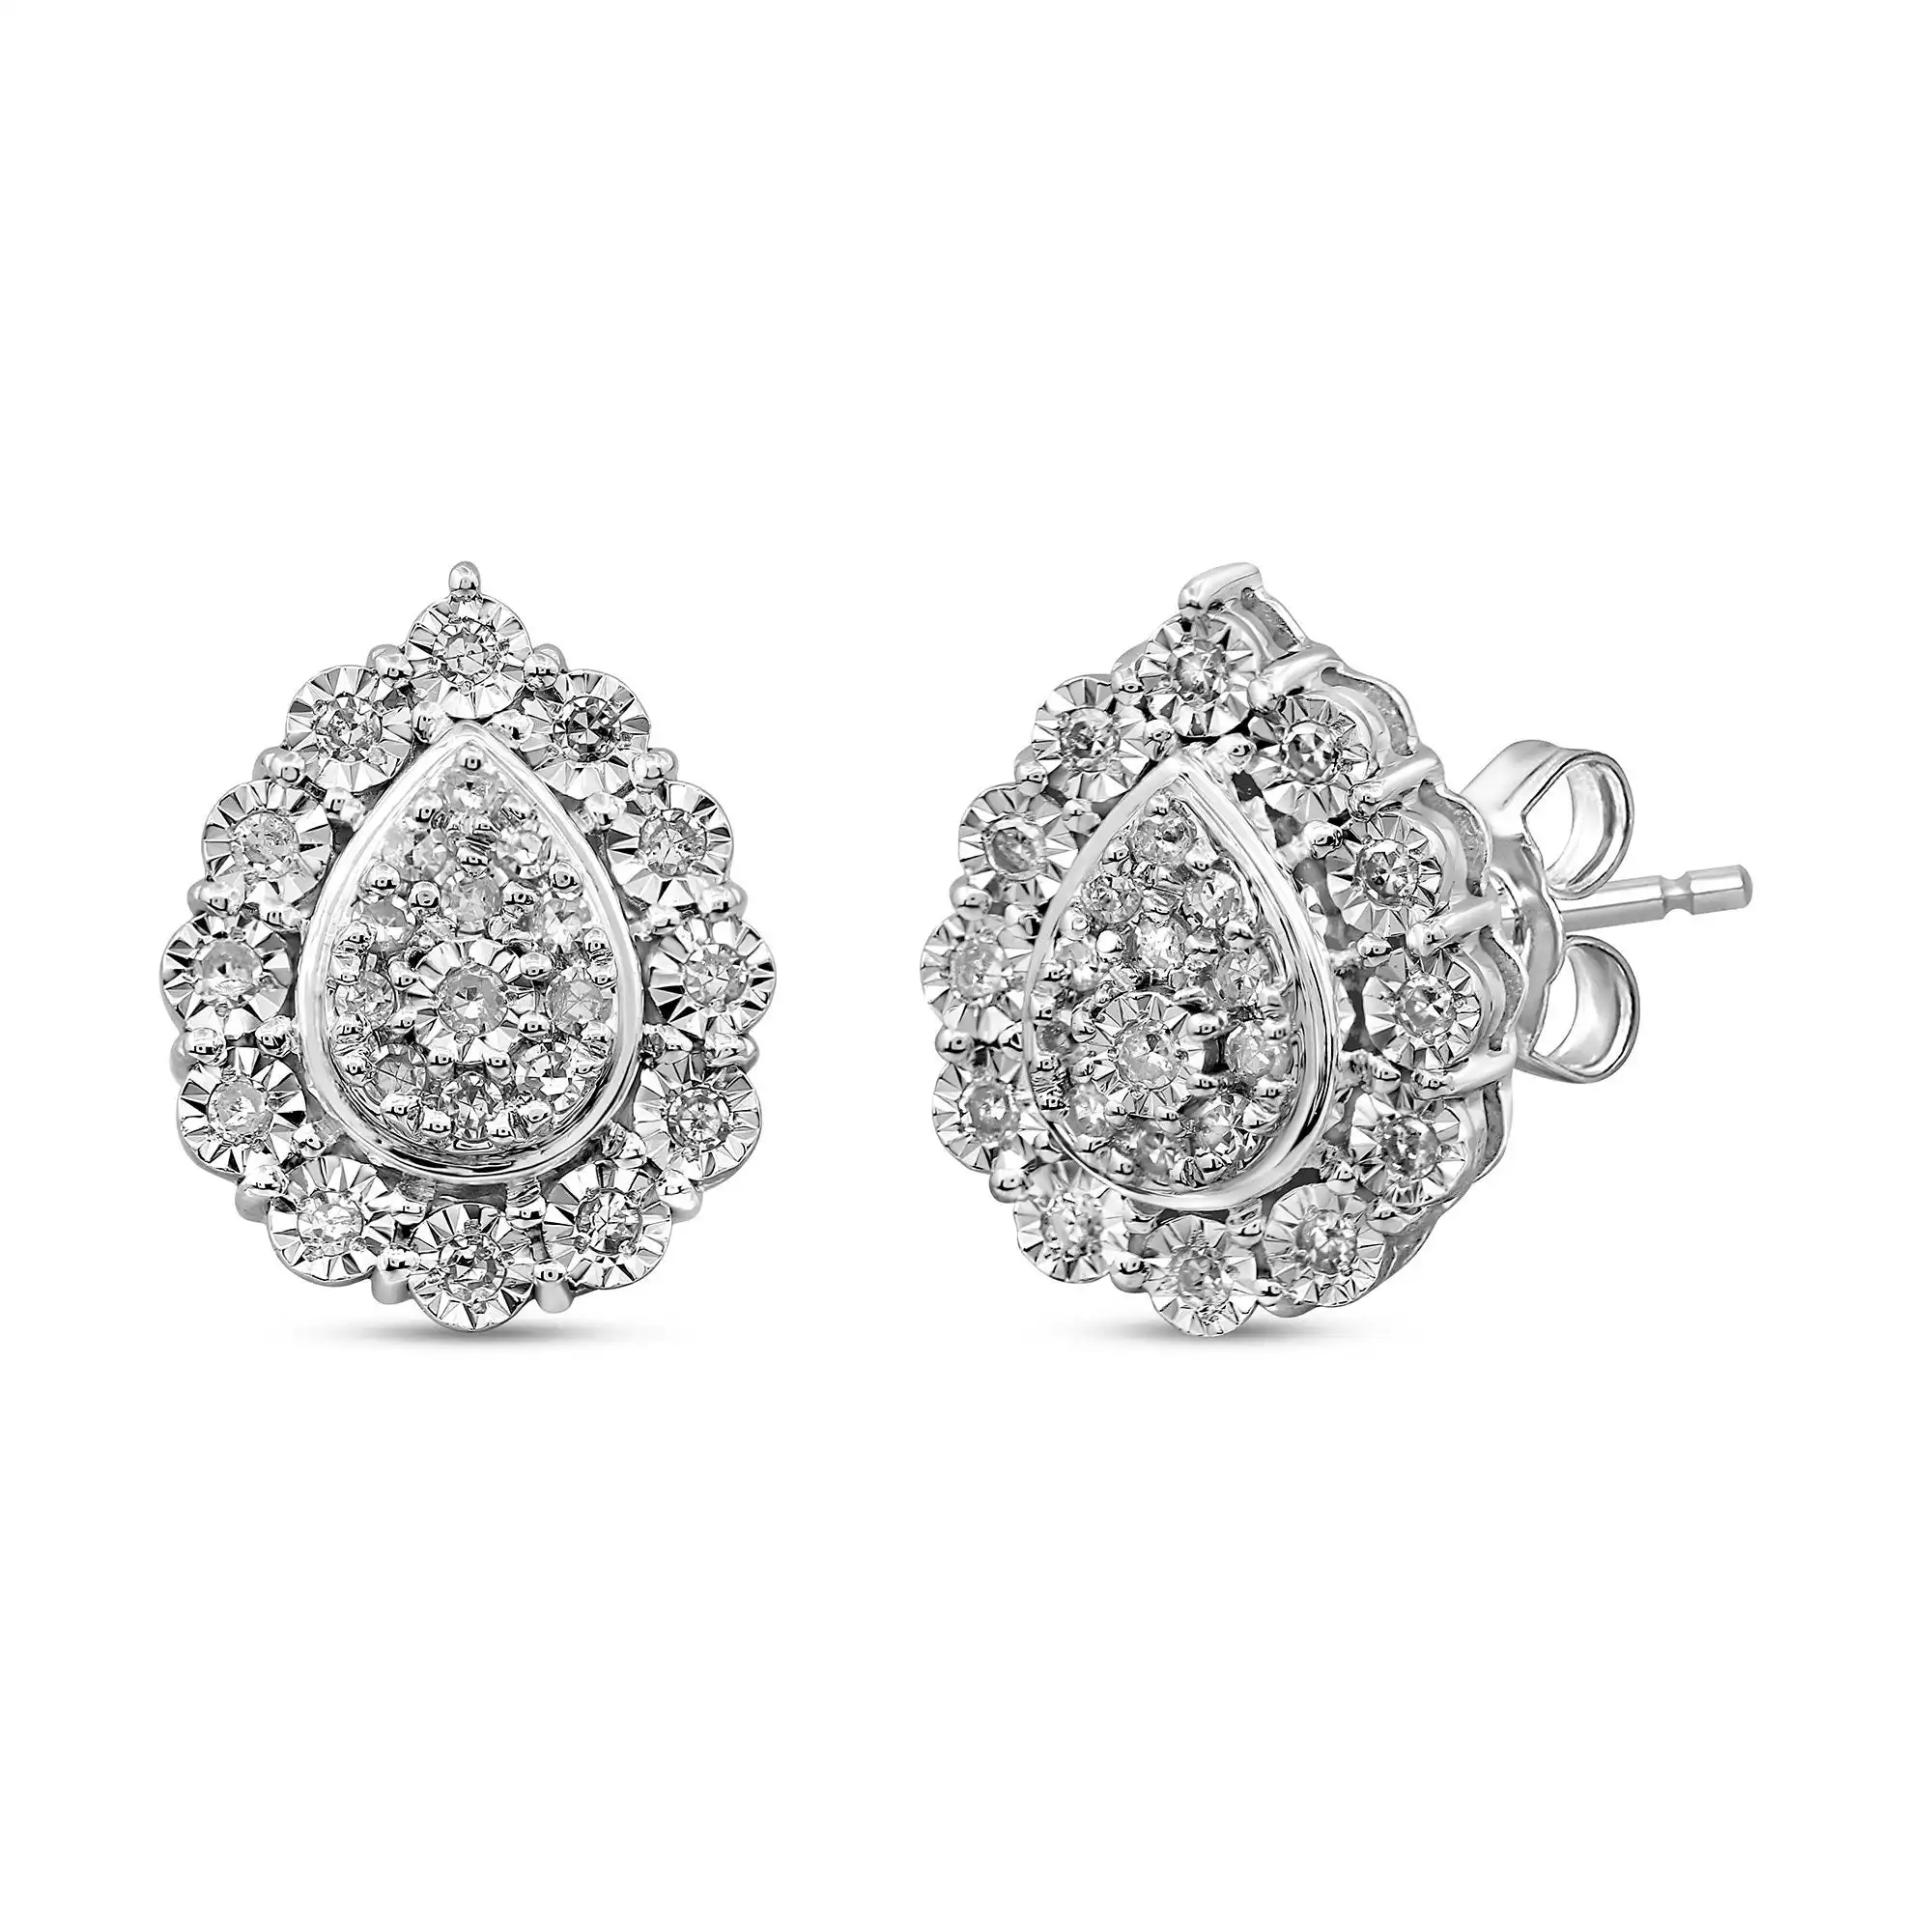 Pear Shape Composite Earrings with 0.15ct of Diamonds in Sterling Silver